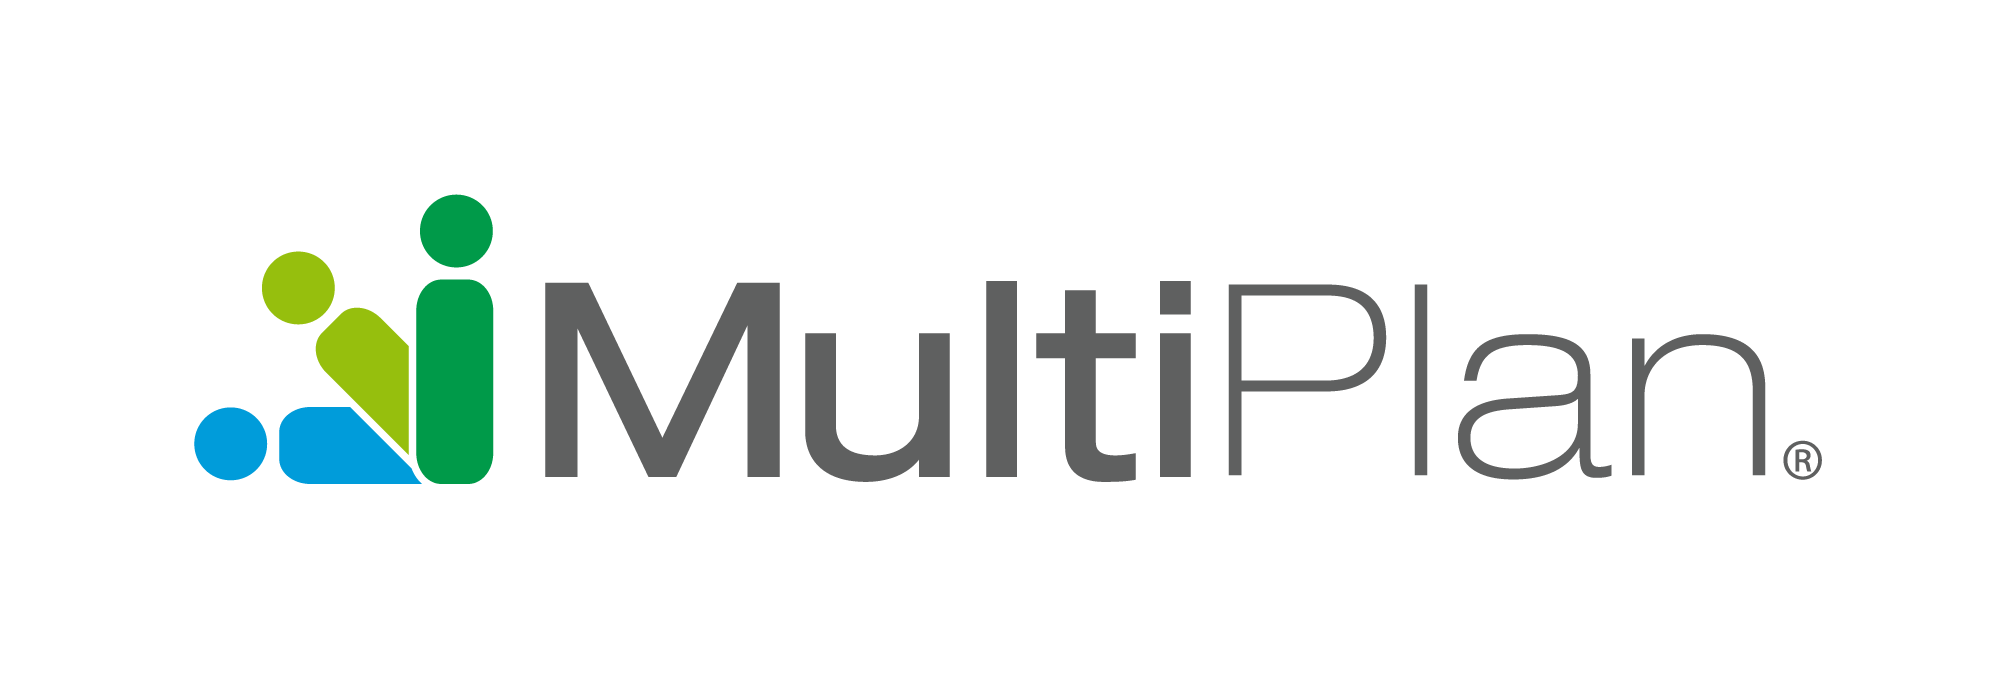 The Multiplan logo in grey, blue and yellow.